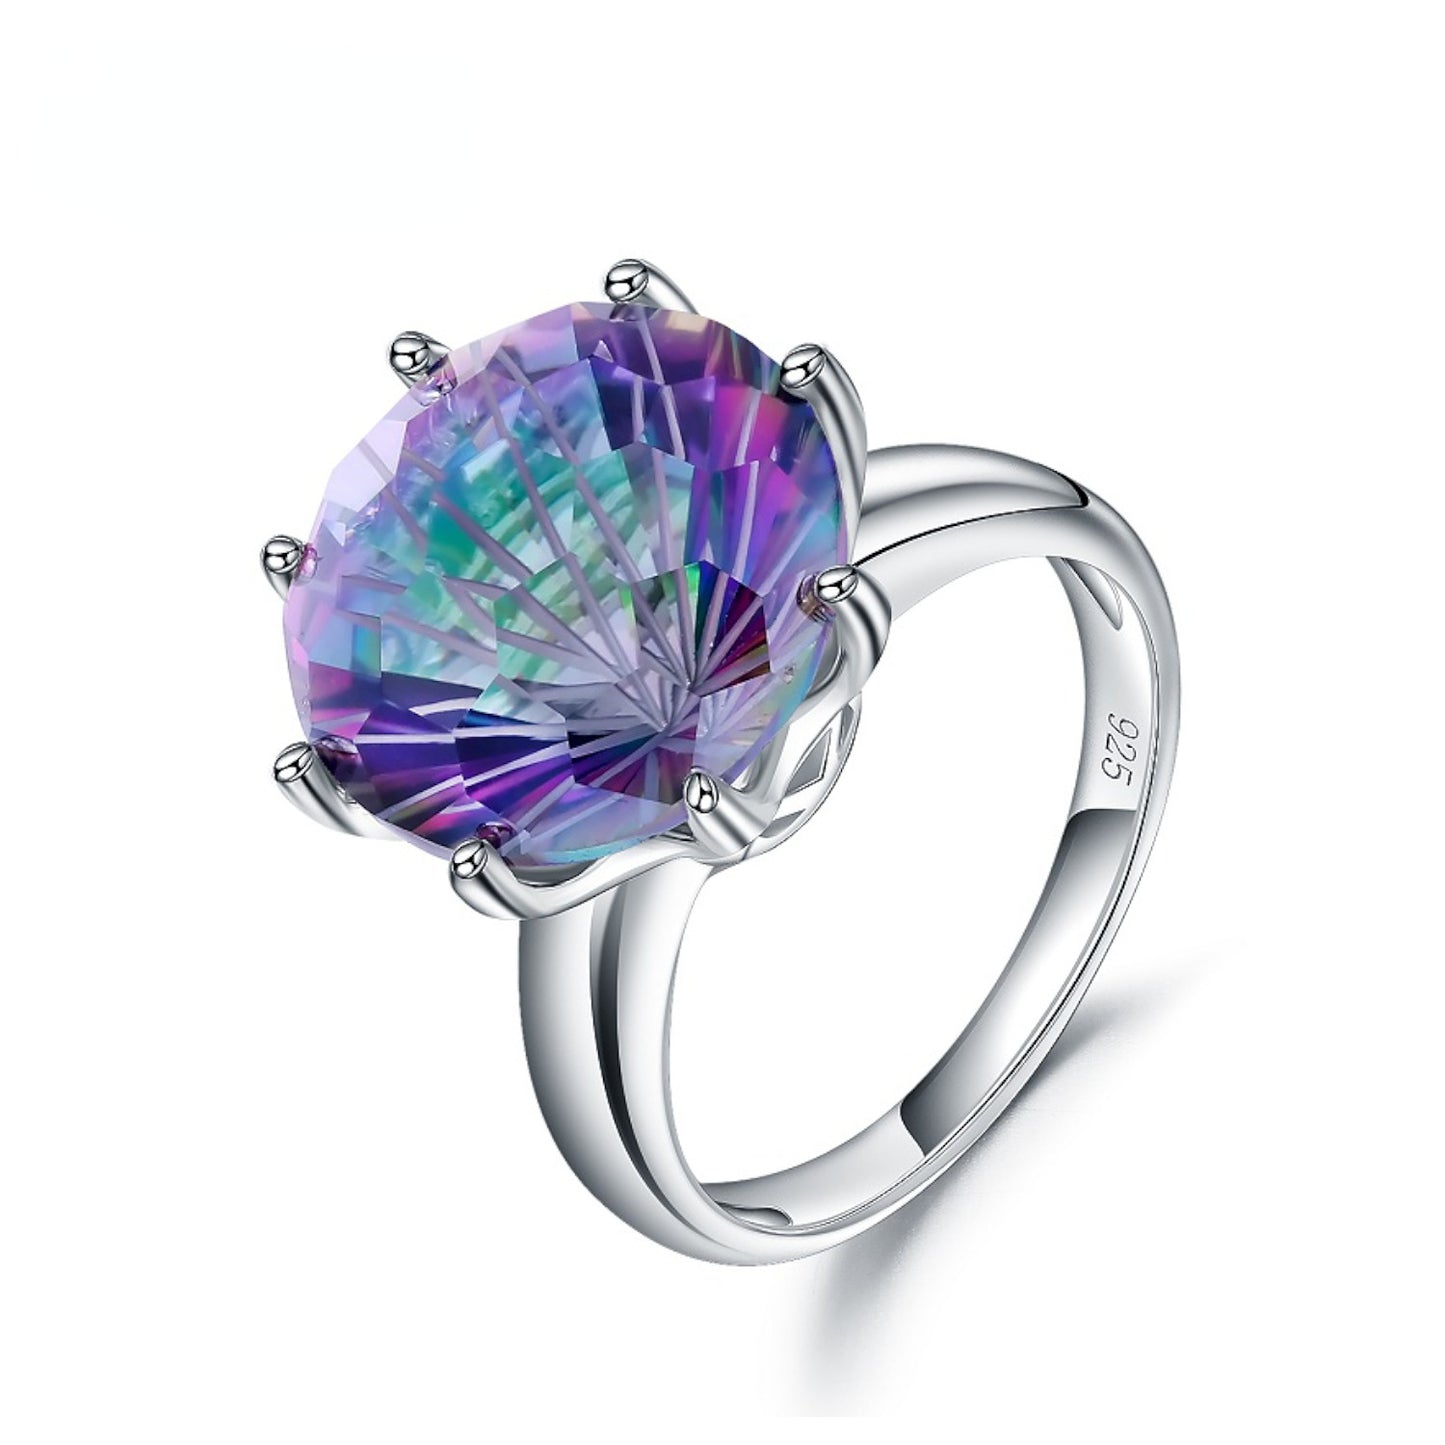 European and American Fashion Sense Inlaid Luxury 14*14mm Colourful Crystal Silver Ring for Women